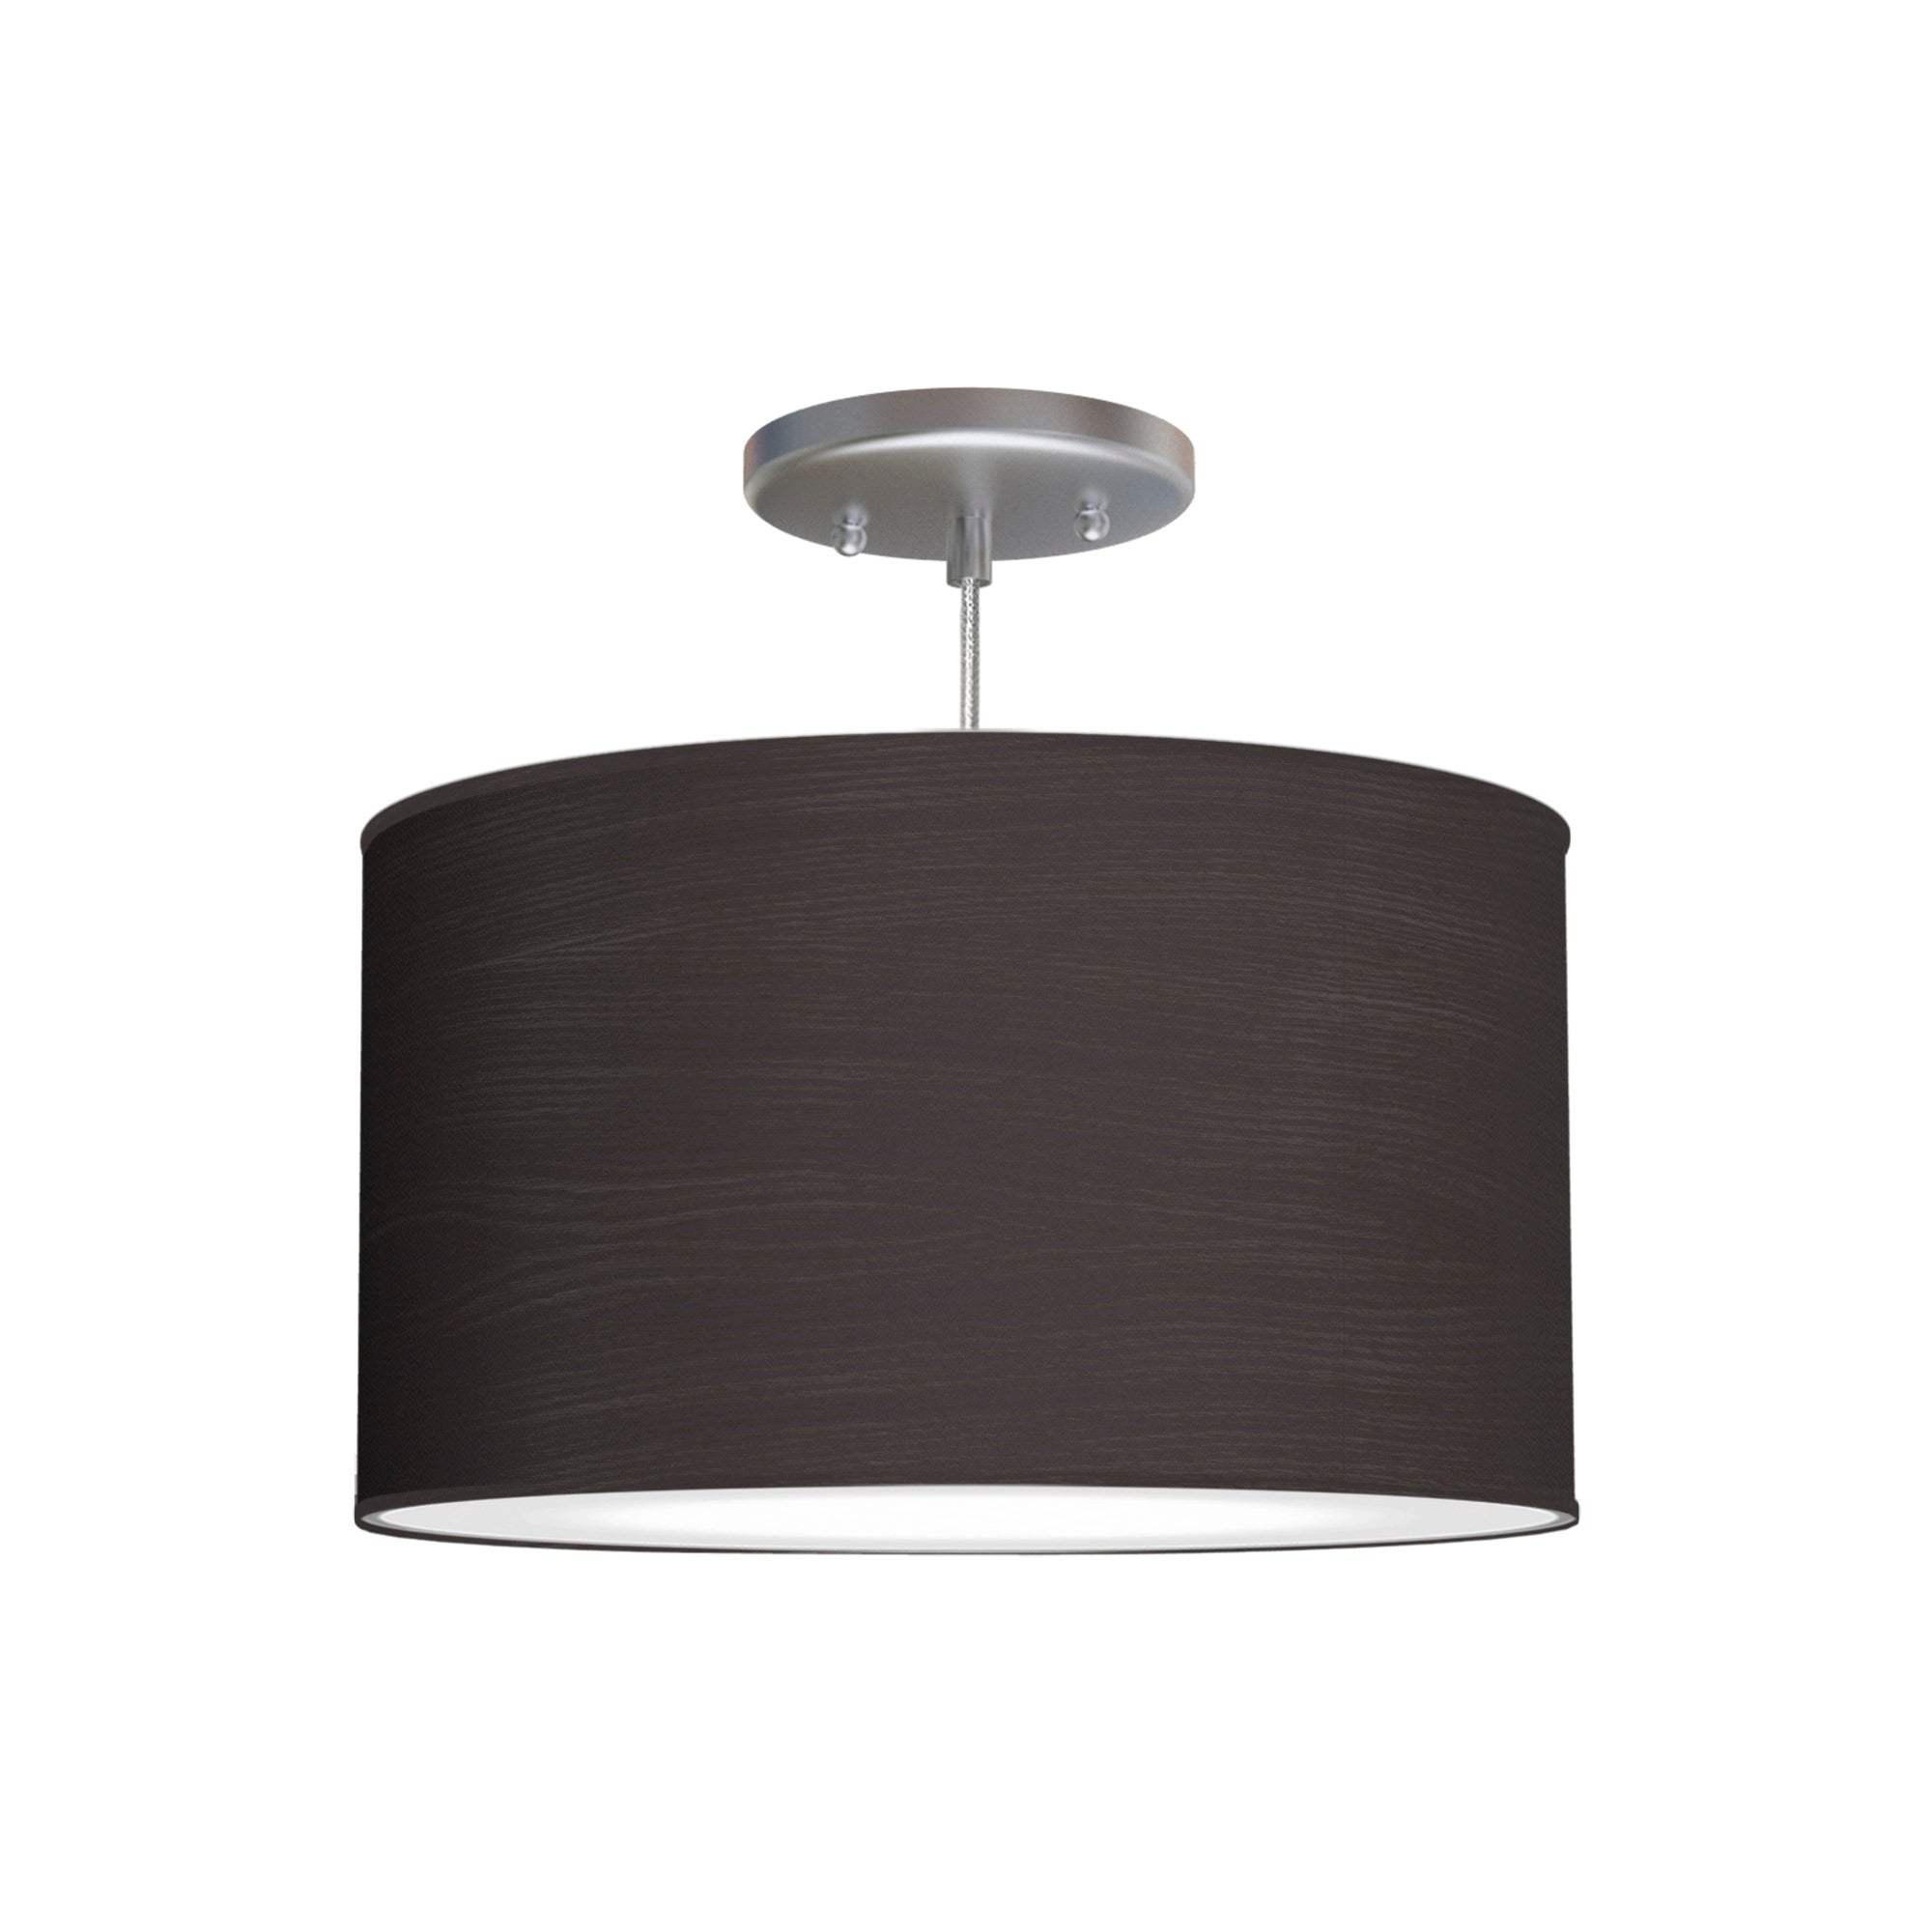 The Gab Hanging Lamp from Seascape Fixtures with a photo veneer shade in ebony color.